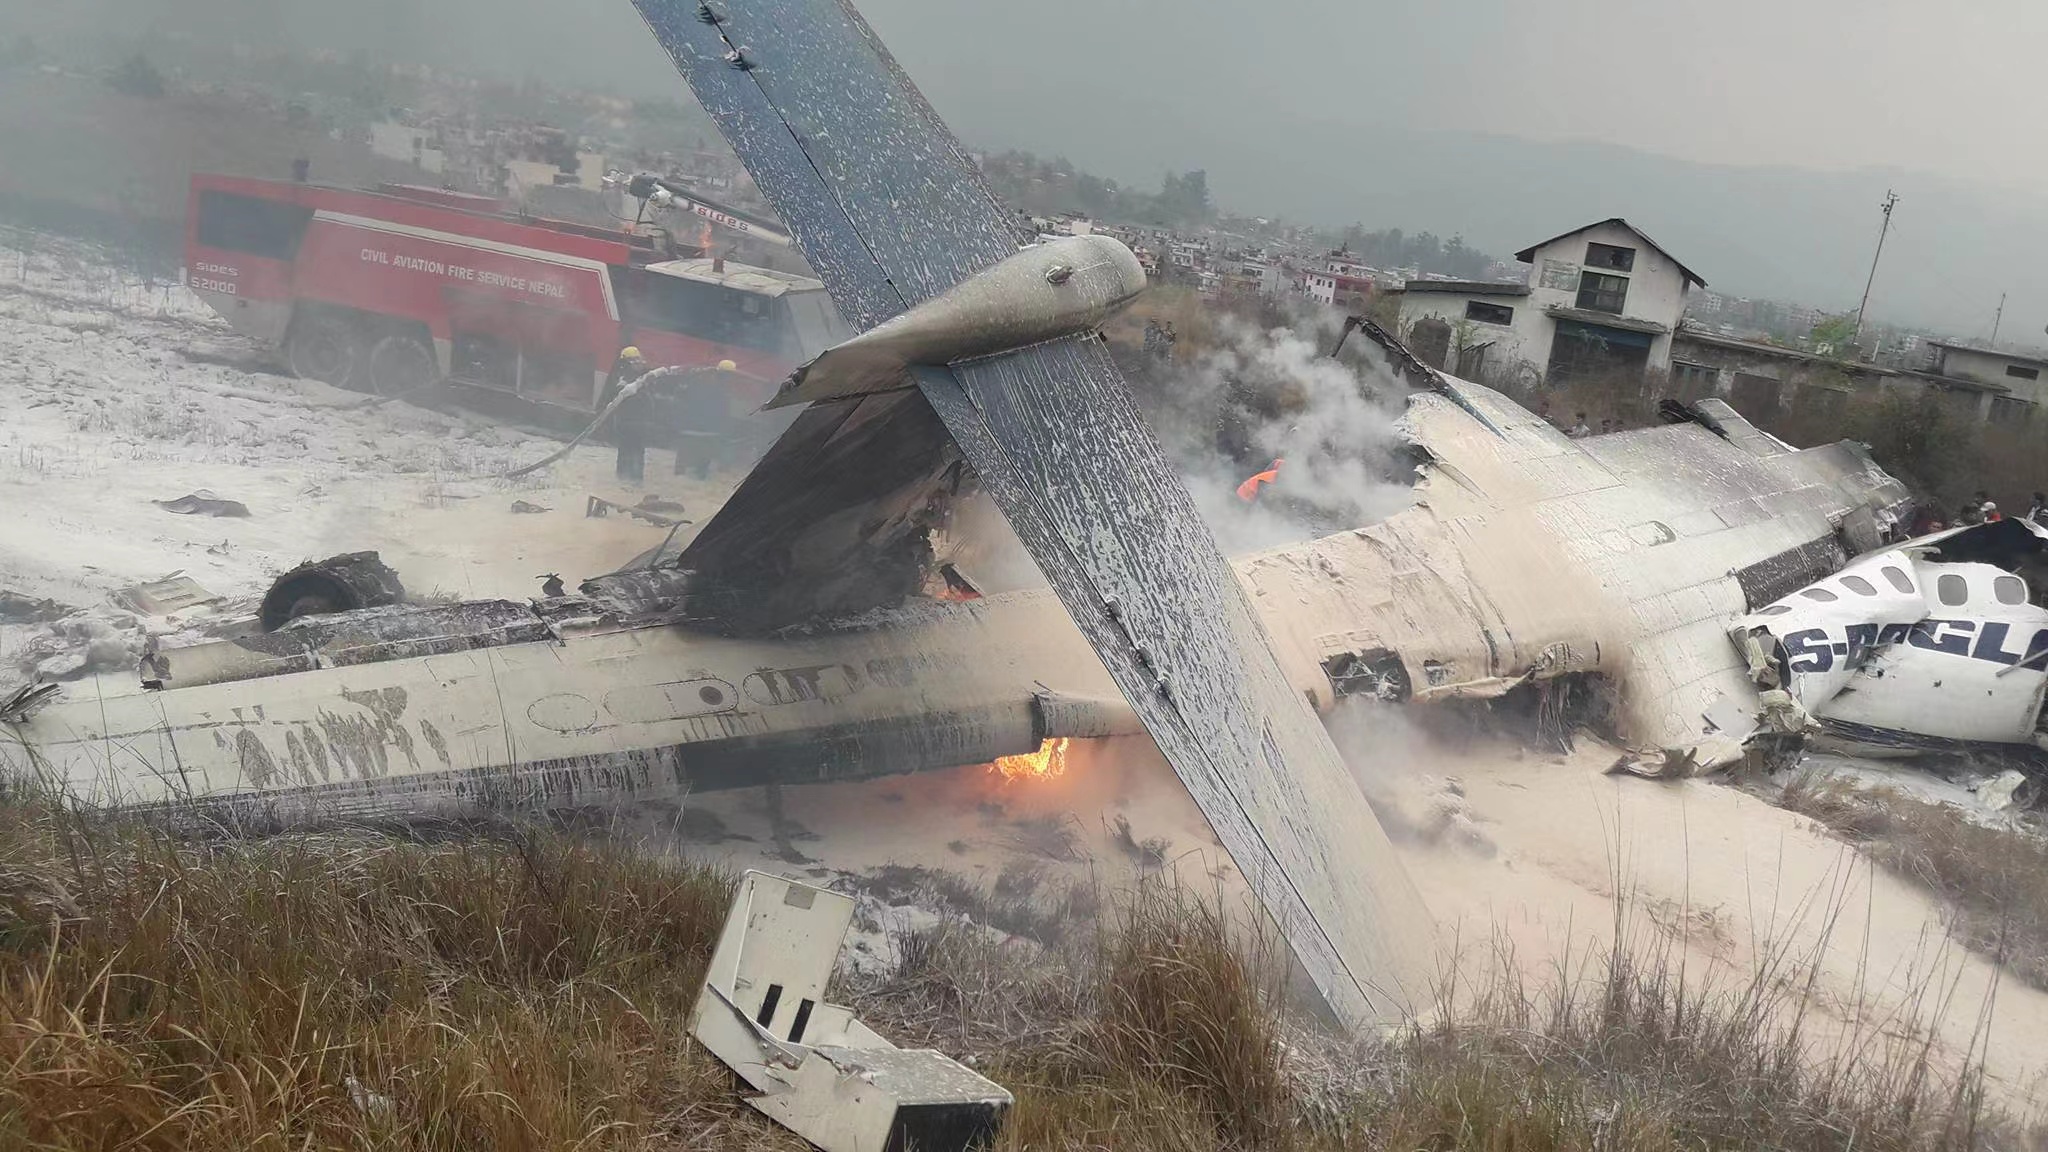 U.S. leaked crucial Boeing repair flaw that led to 1985 JAL jet crash ...